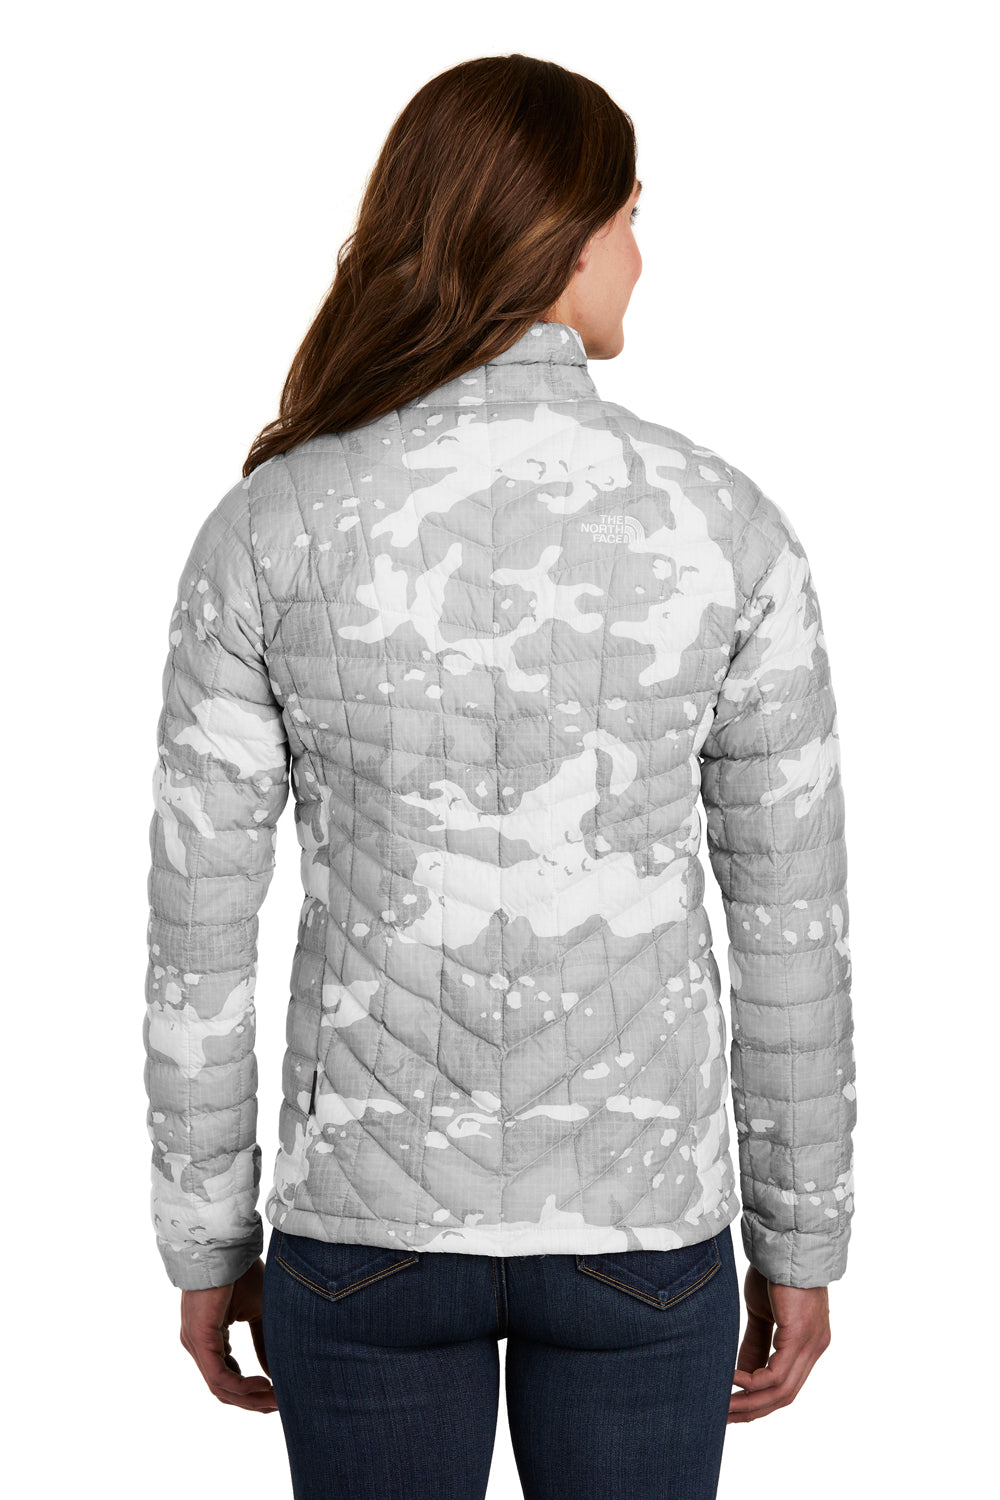 The North Face NF0A3LHK Womens ThermoBall Trekker Water Resistant Full Zip Jacket White Camo Back